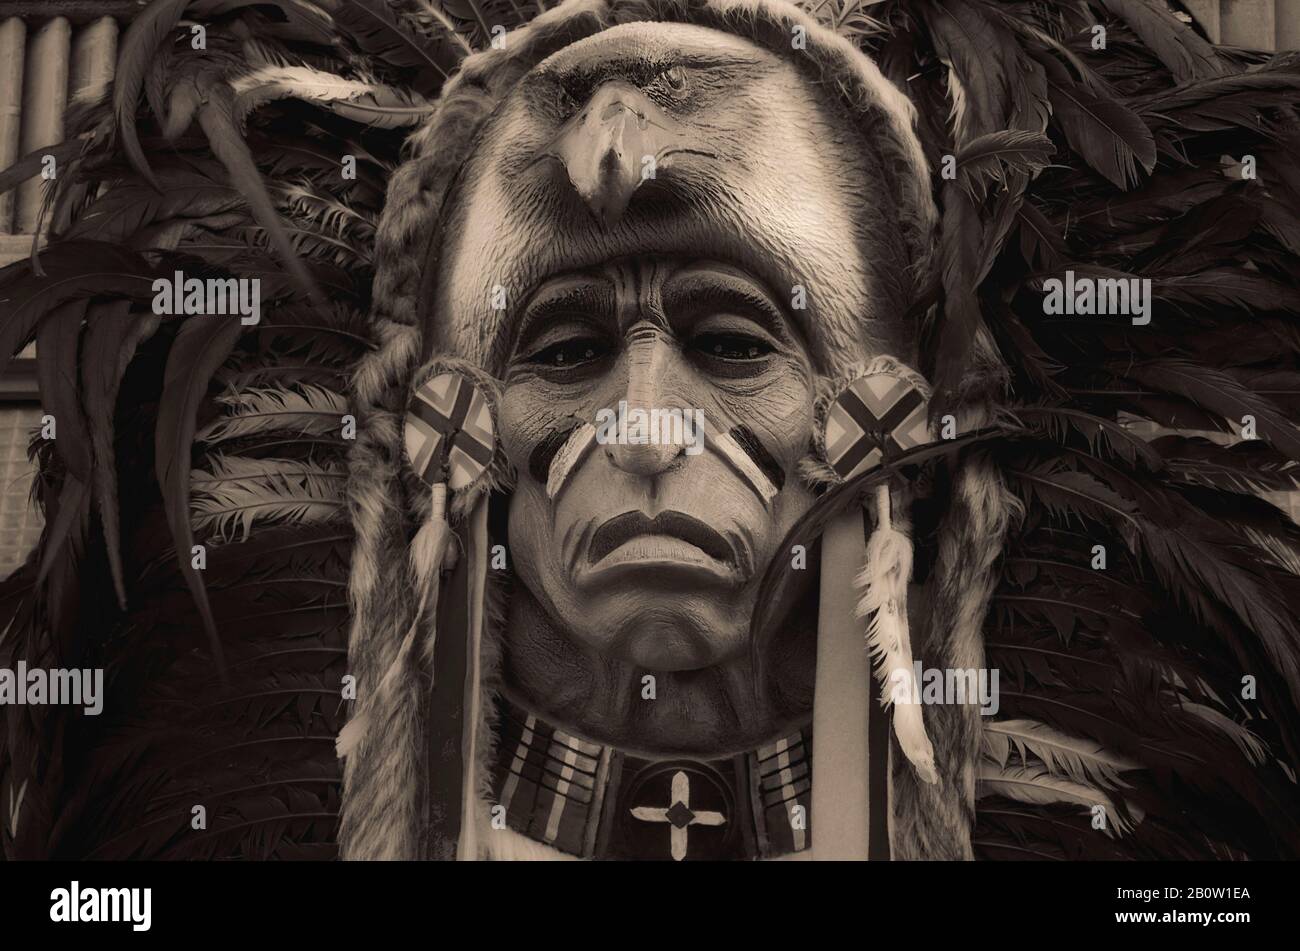 wood carving of an ancient feather black and white mask Stock Photo